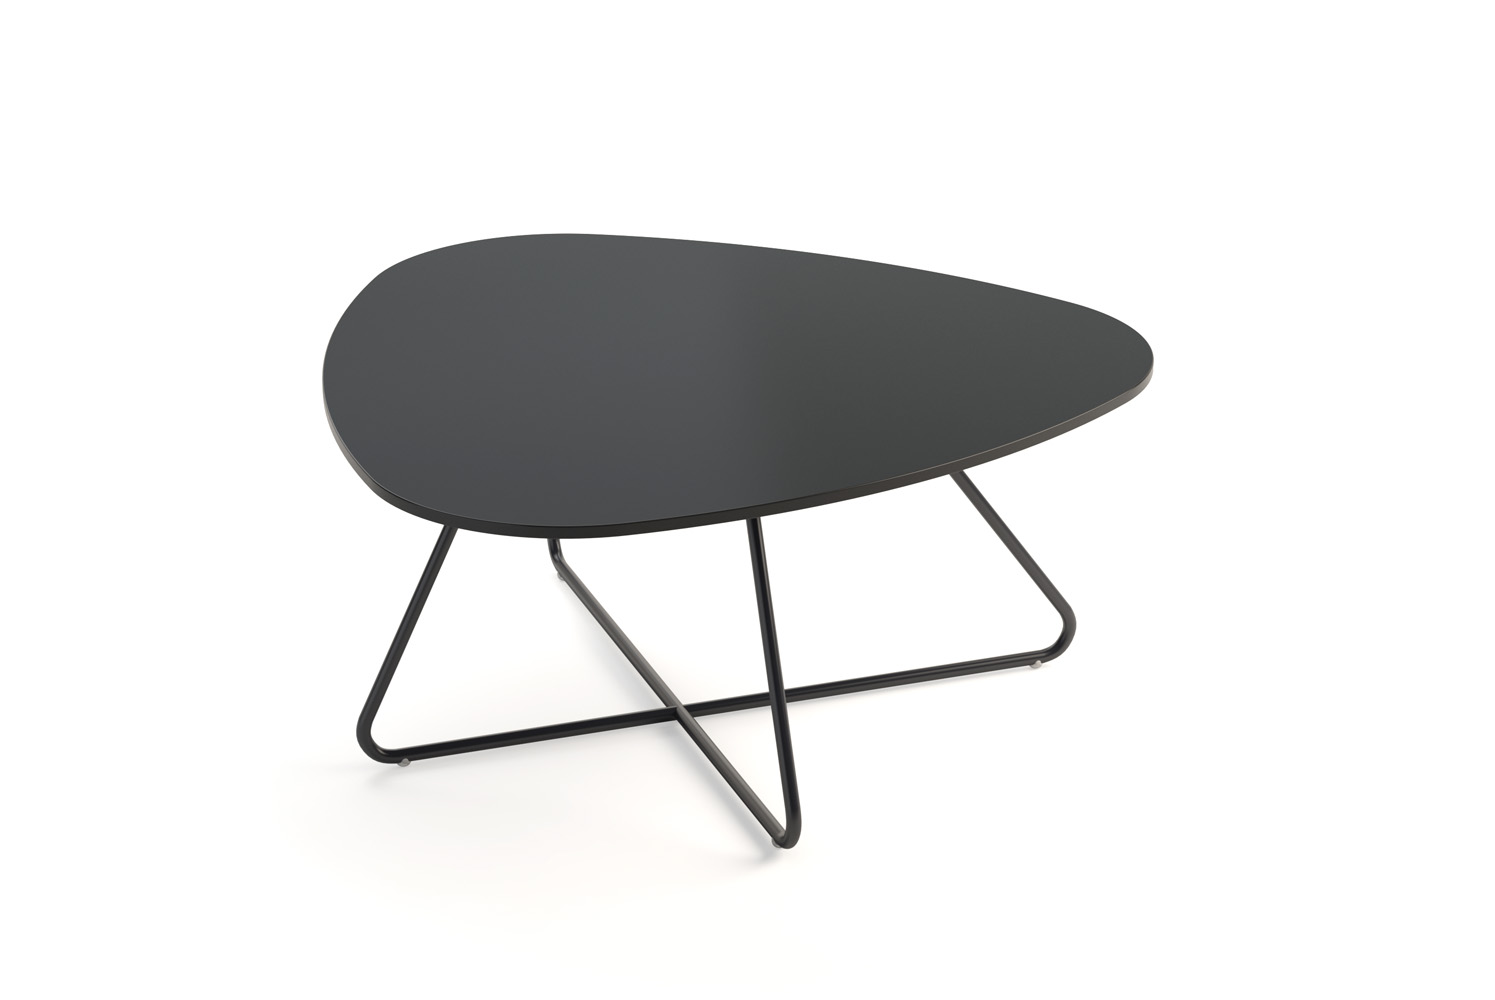 Marlo Occaional Table, Round Triangle Top, All Black